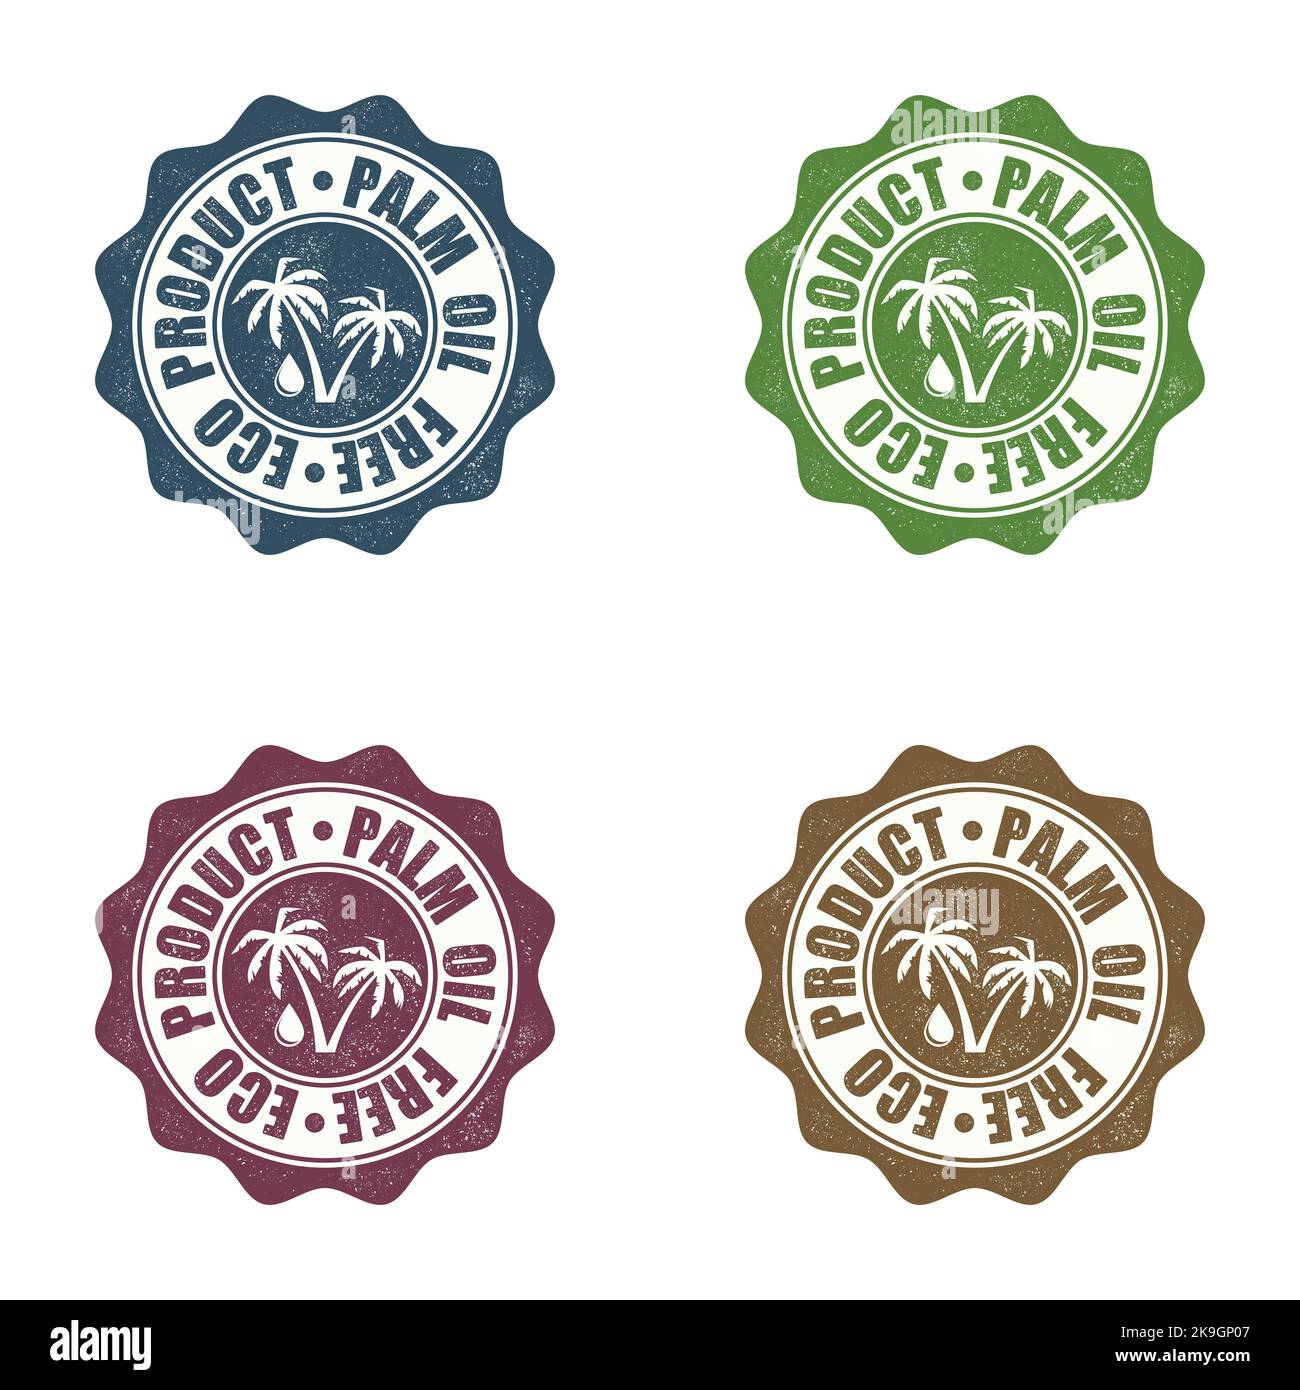 Palm oil free product seals set Stock Vector